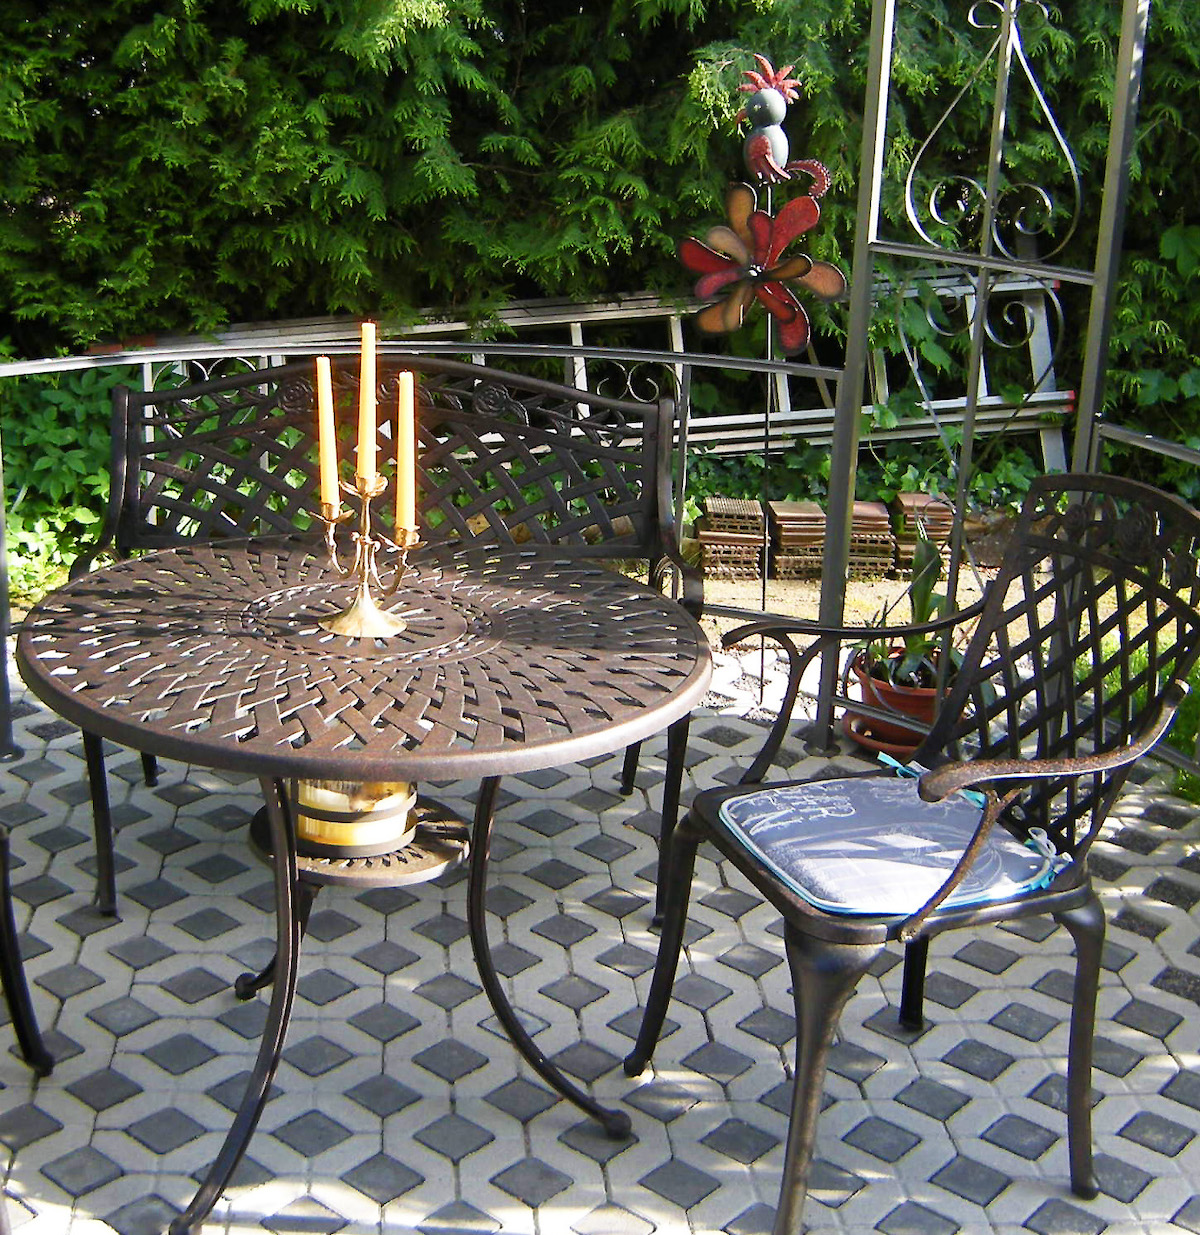 Garden Table Centrepiece | Let there be light